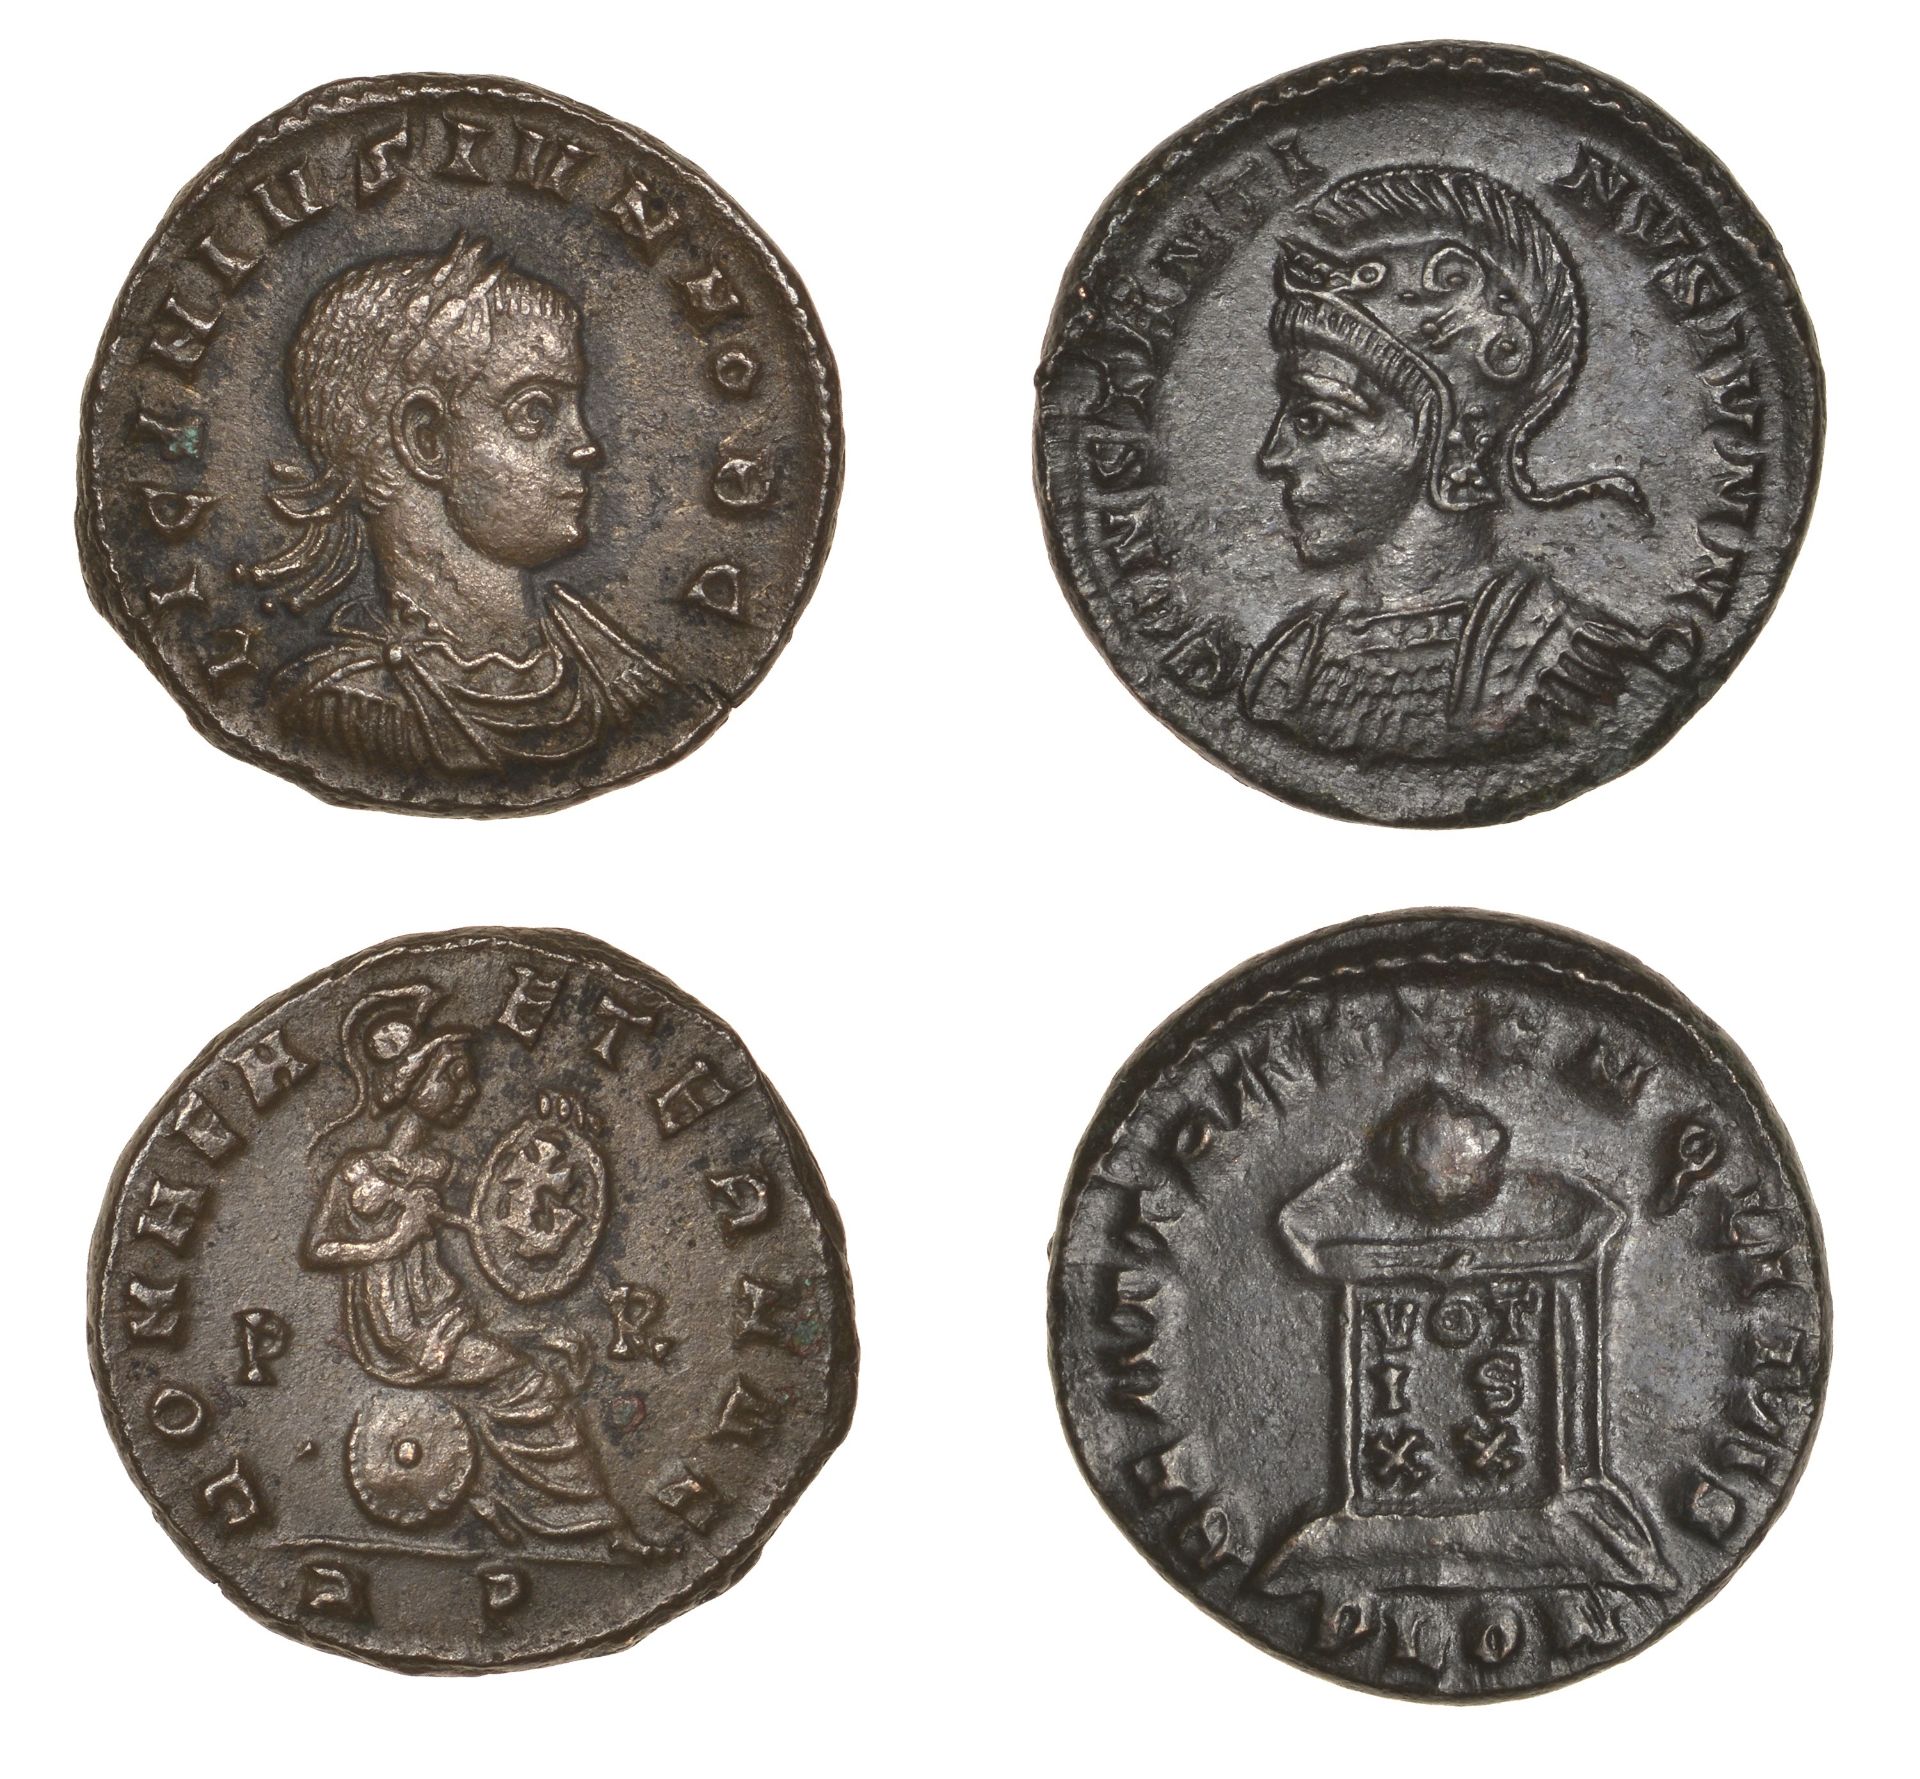 The Michael Atkin Collection of Roman Coins